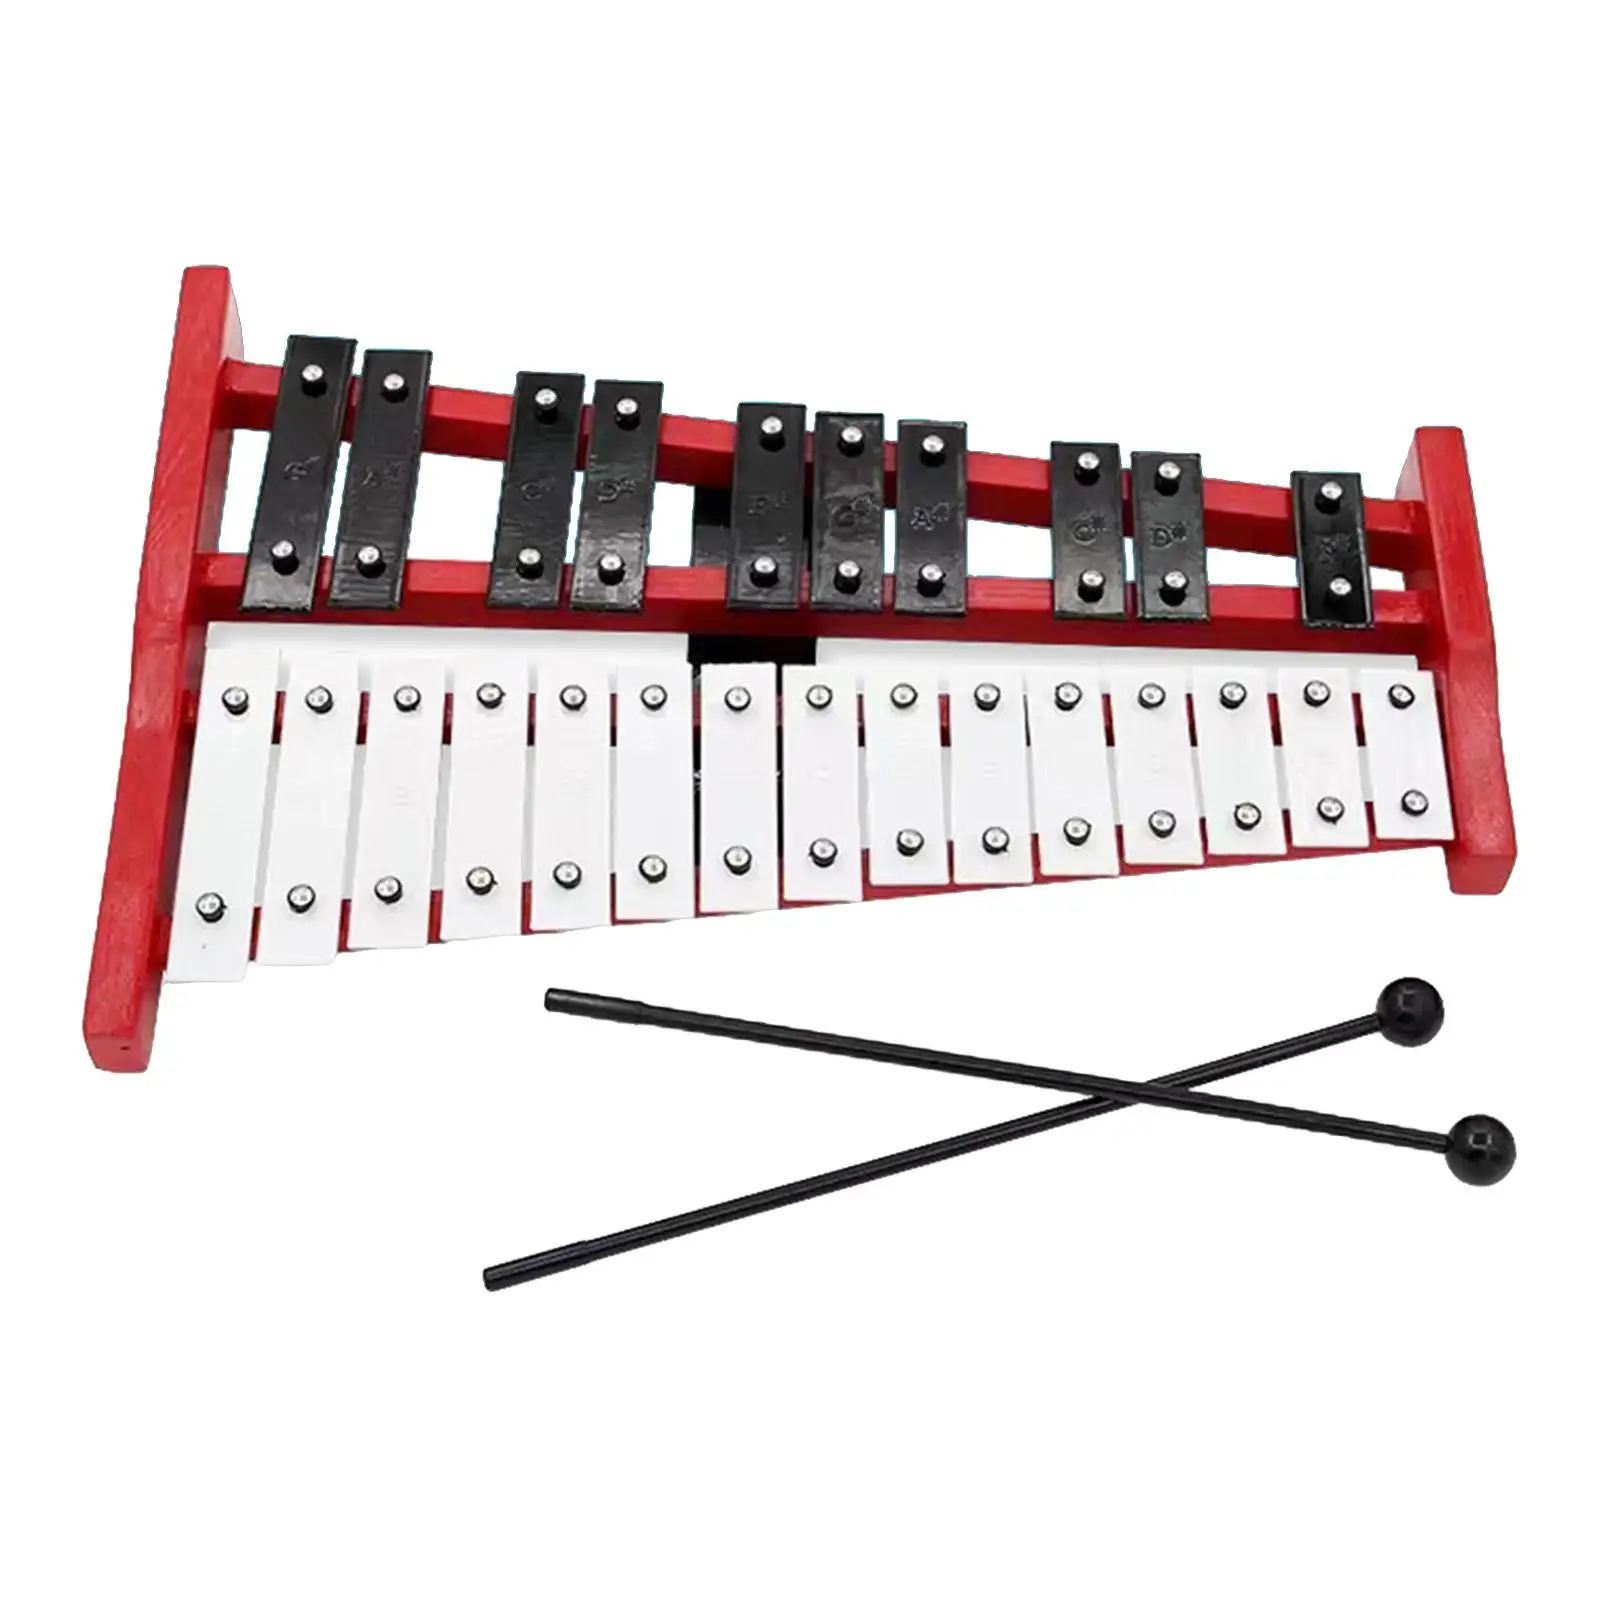 Glockenspiel Xylophone Kids Music Toy 25 Note for Music Lessons Home Outside